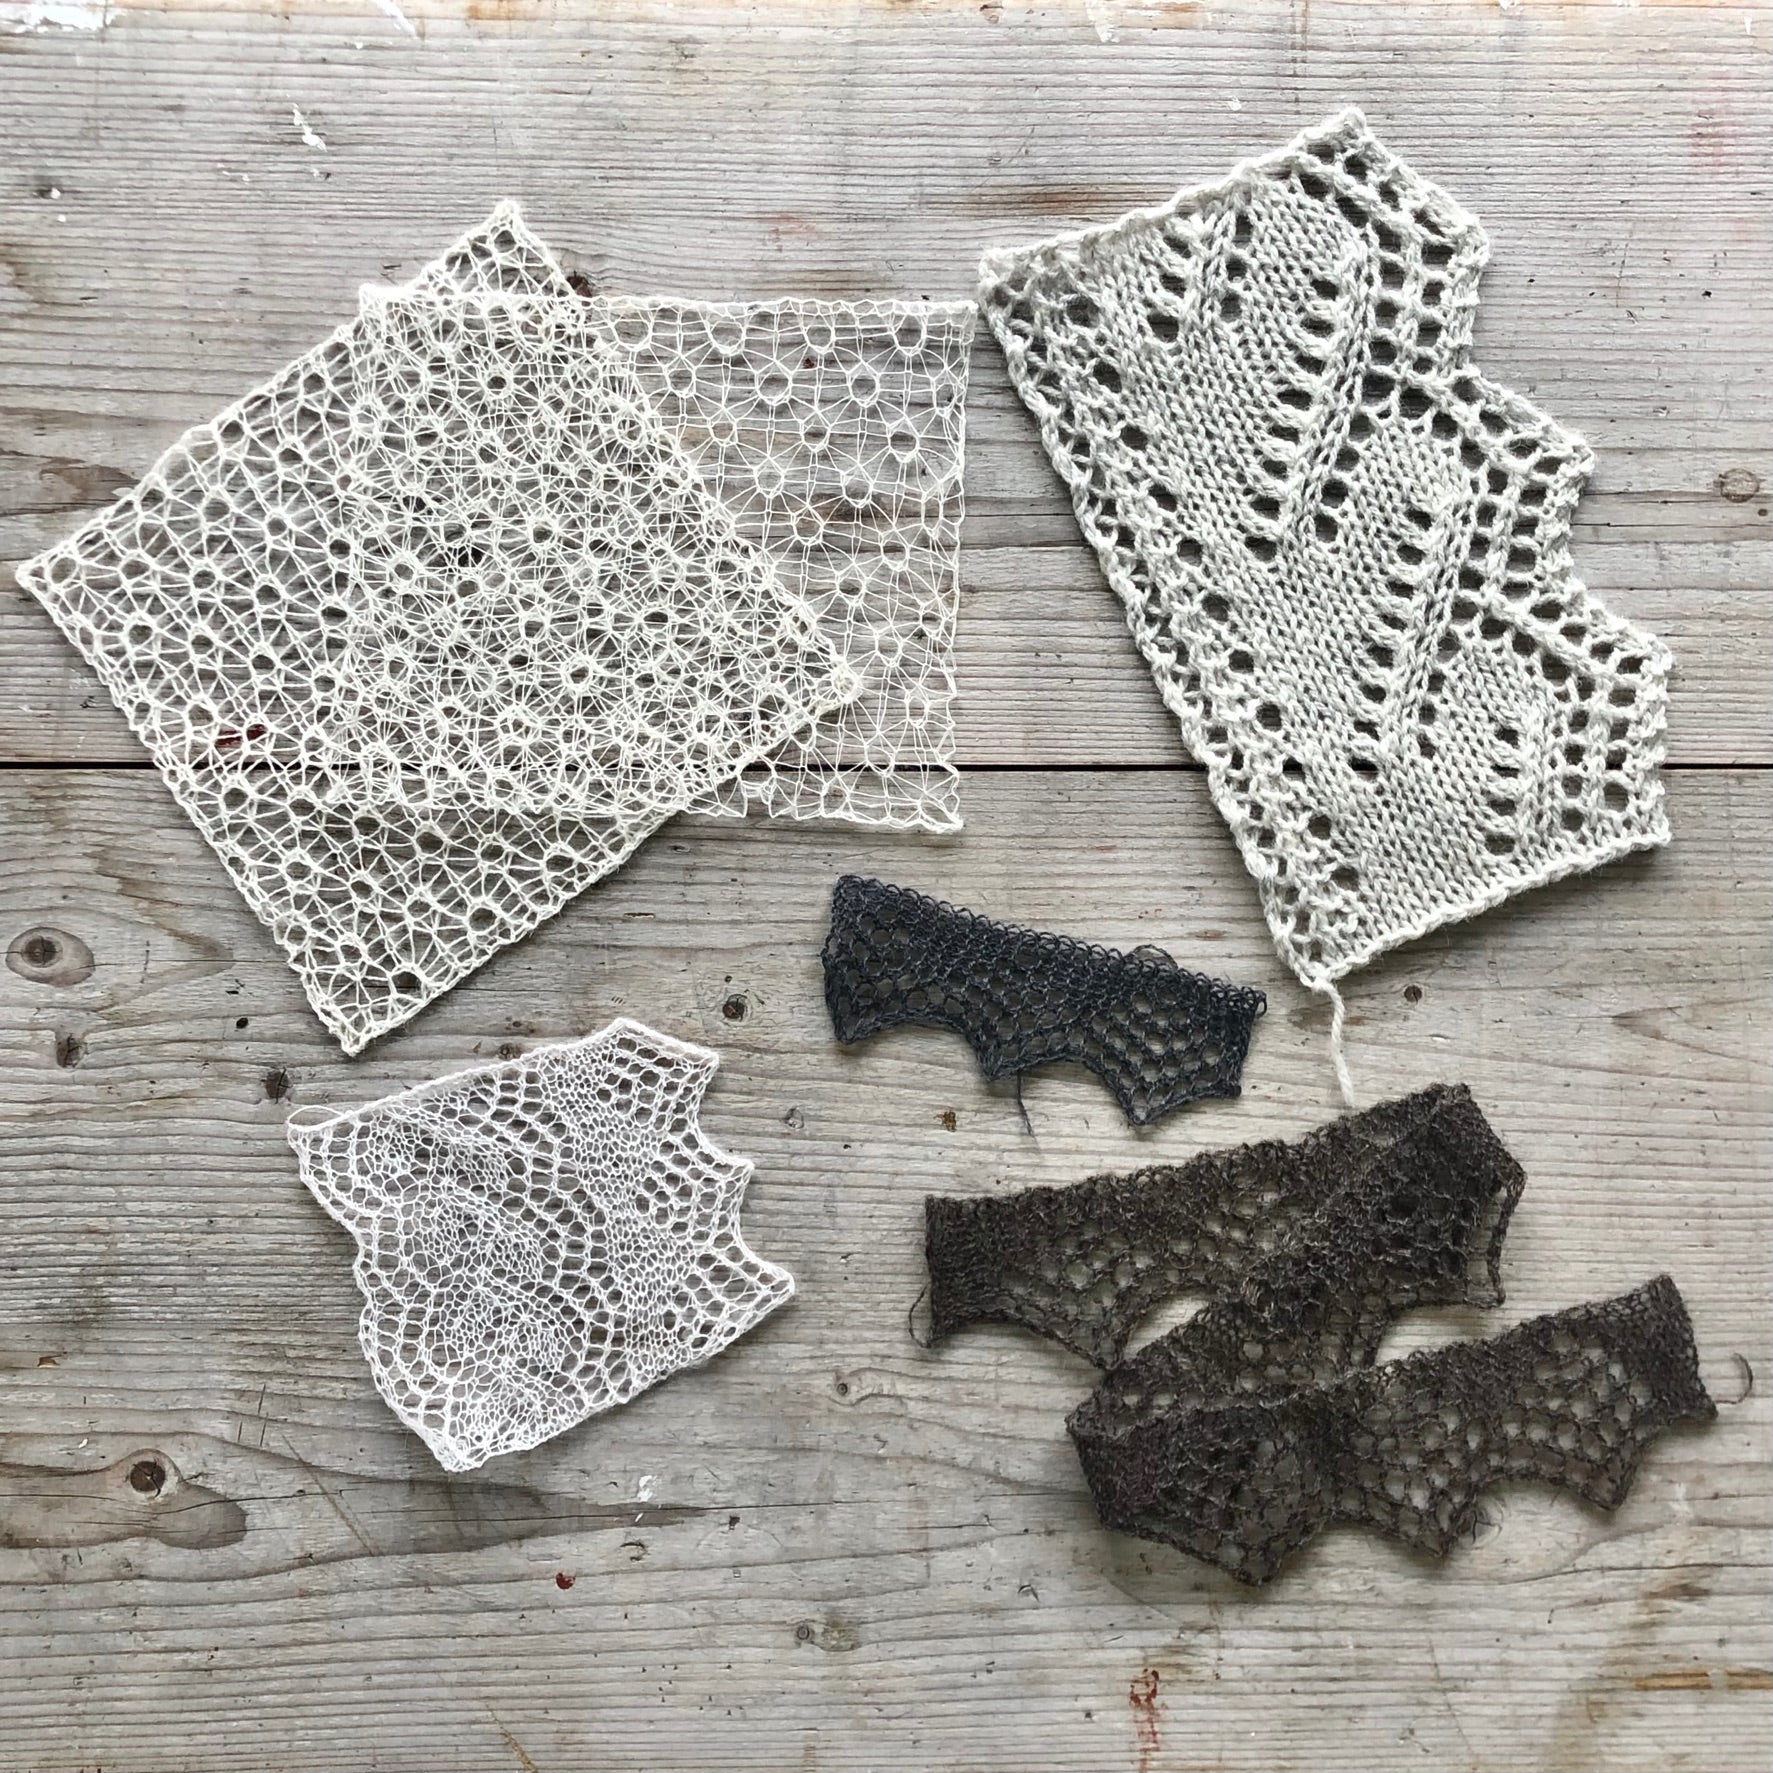 Shetland Lace - the fascination with the thin thread...! 1 Oct at 09.30 - 12.30